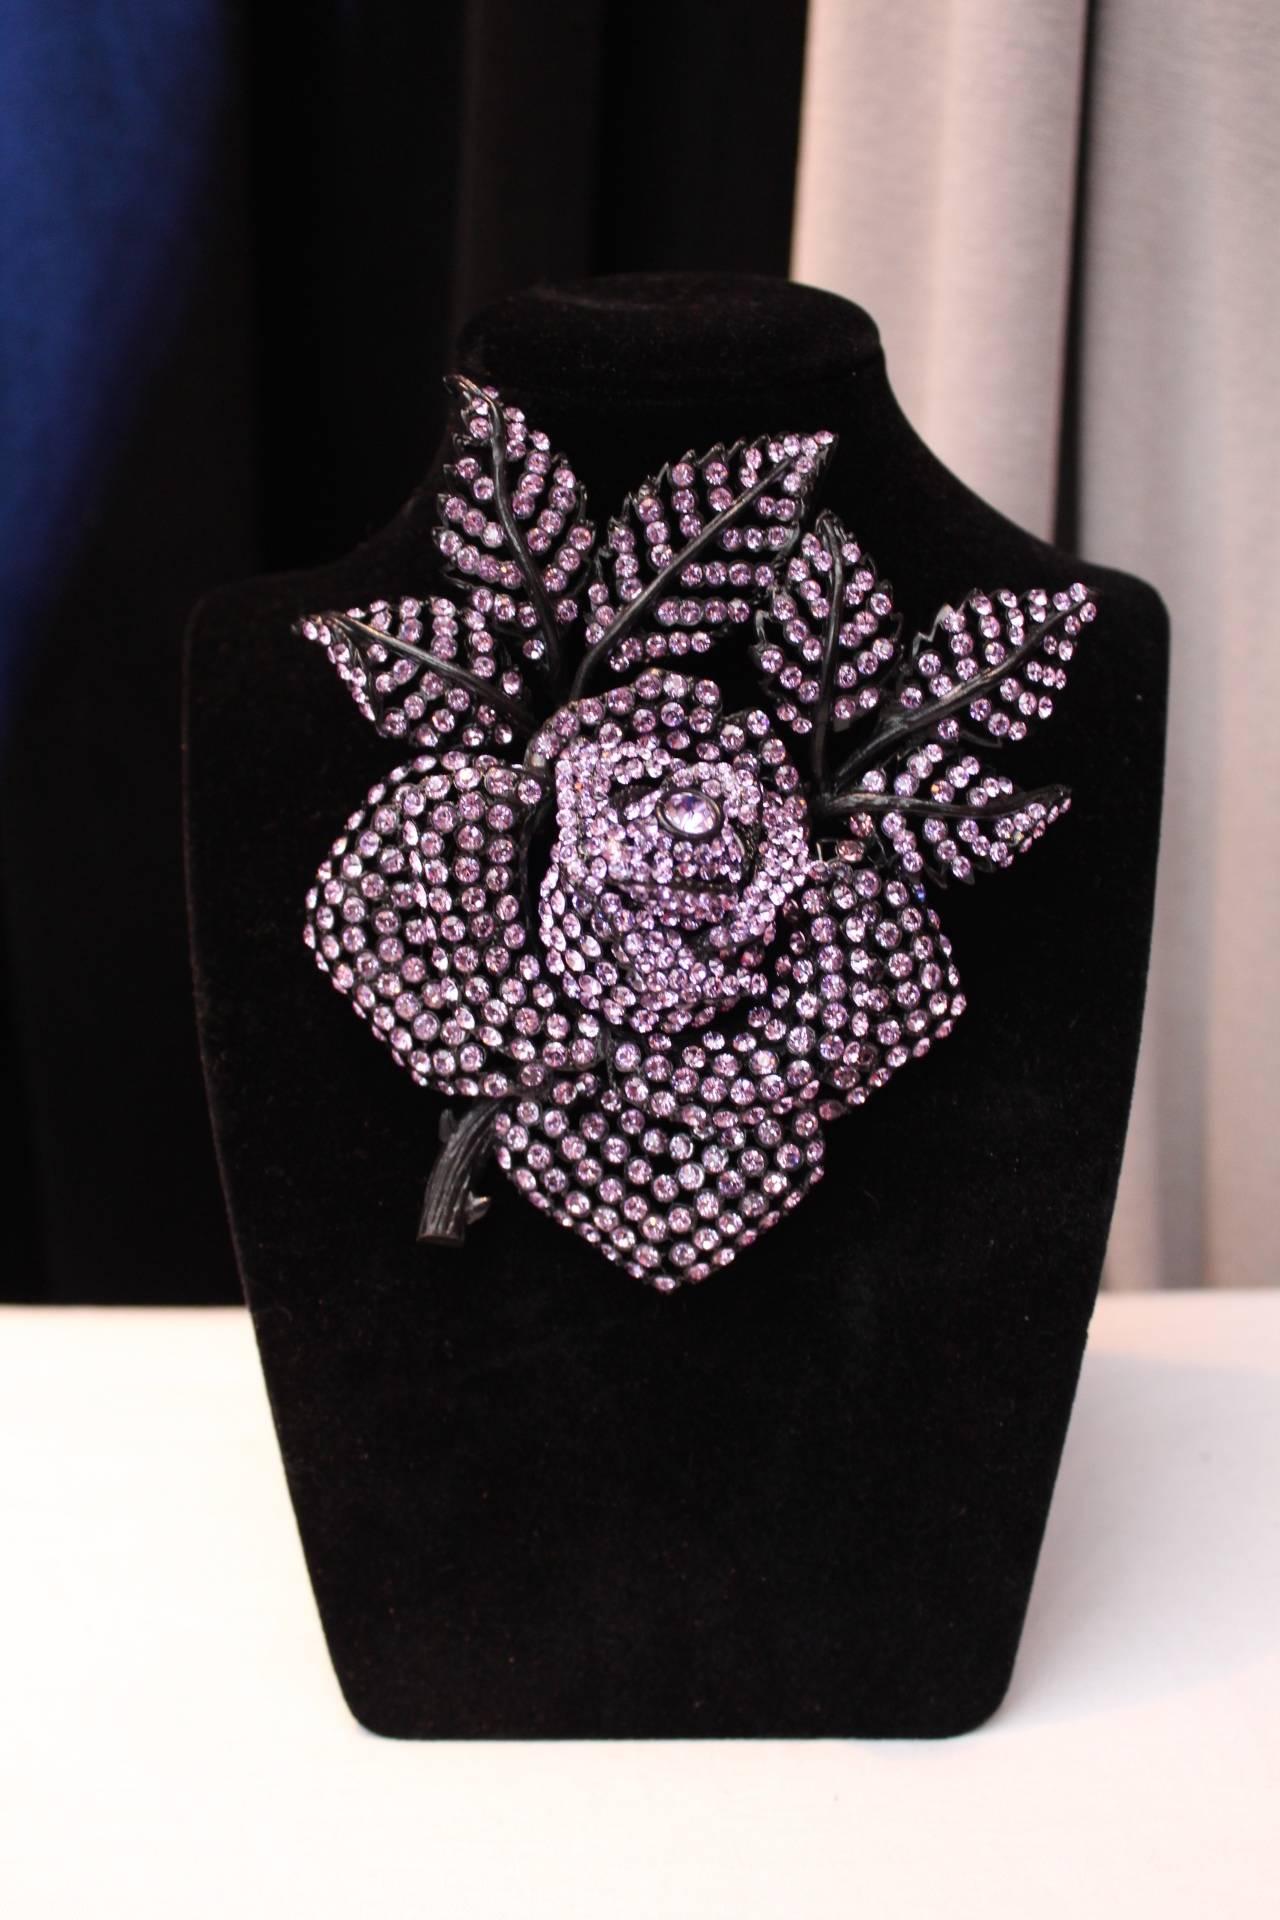 SONIA RYKIEL (Paris) Large brooch in blackened metal paved with parma crystals figuring a rose and its leaves.

Double spindle / attachment in the back.

Very good condition.

Dates from the 2000s

Measurements: Length 14 cm, Width 13 cm